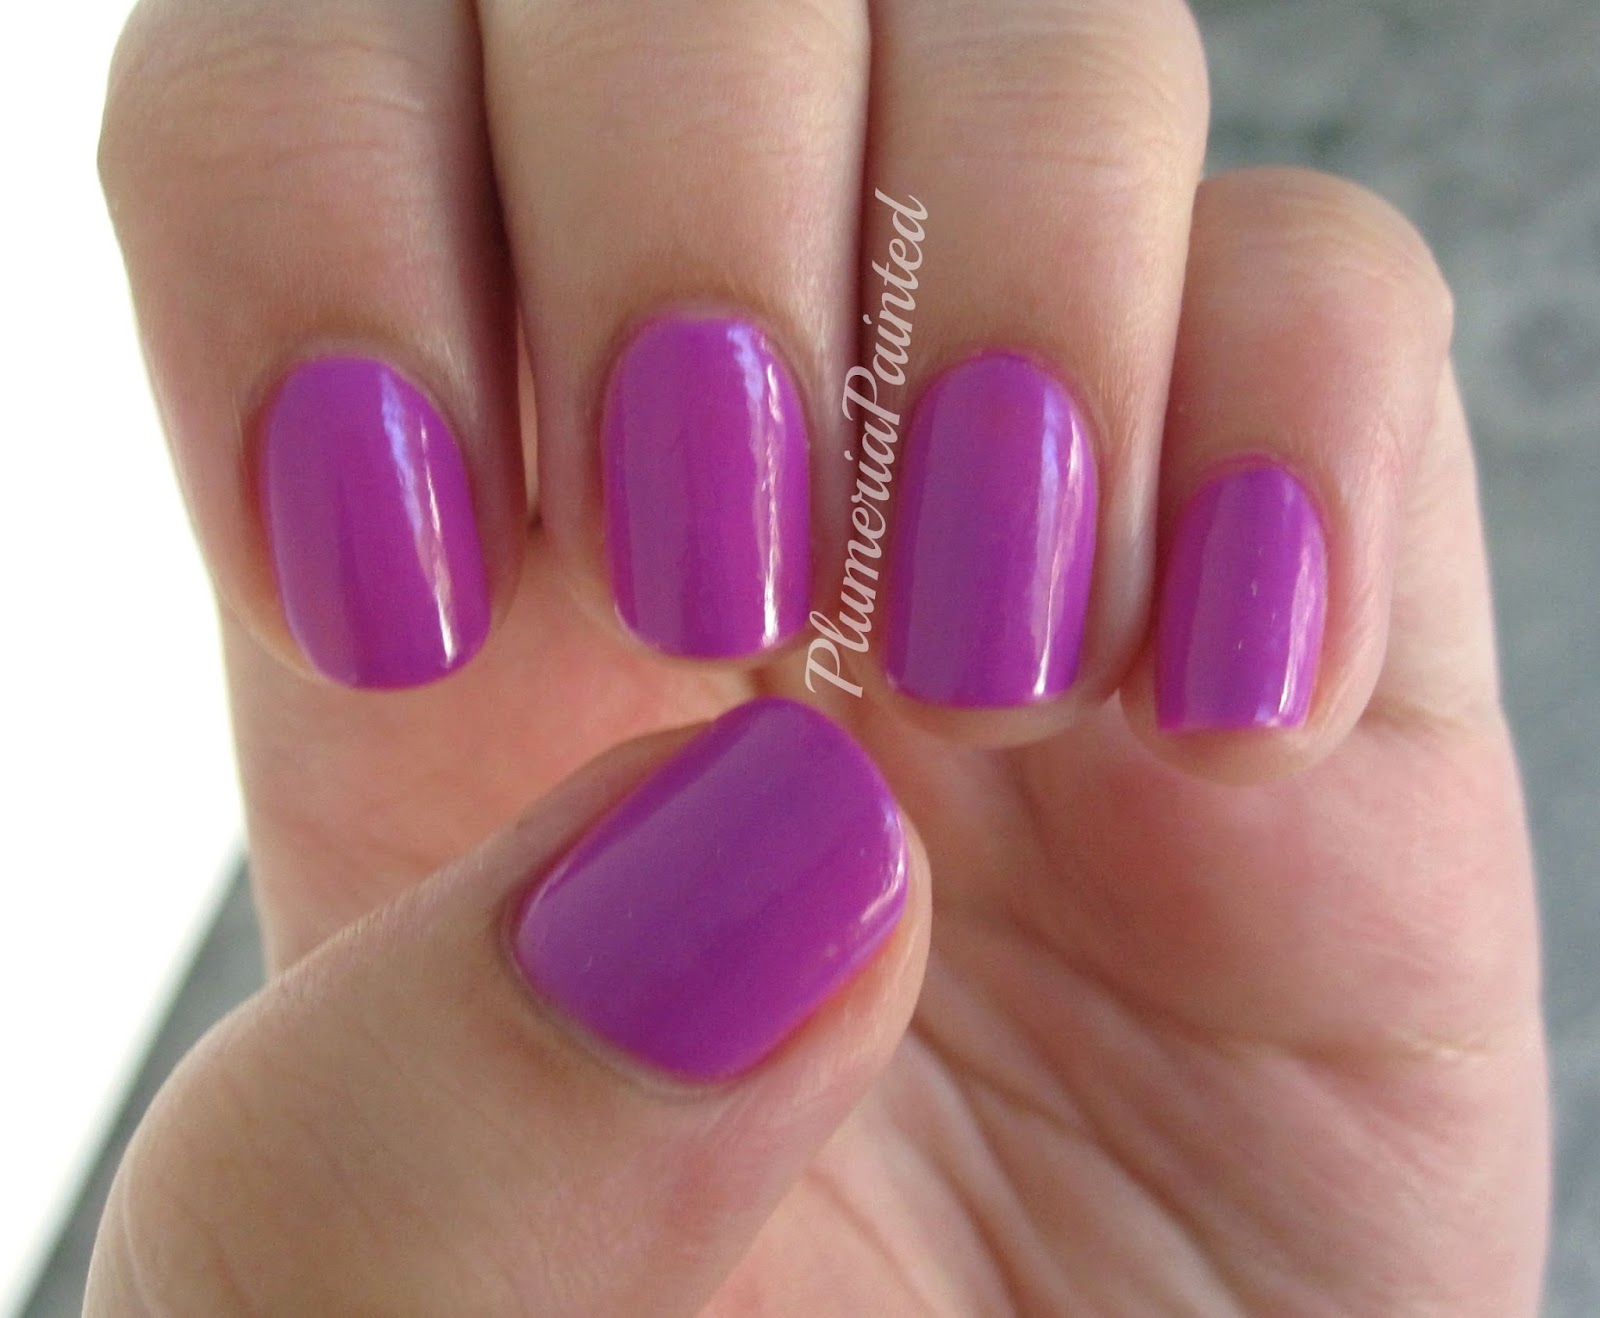 Orly Nail Polish Color of the Week - wide 1